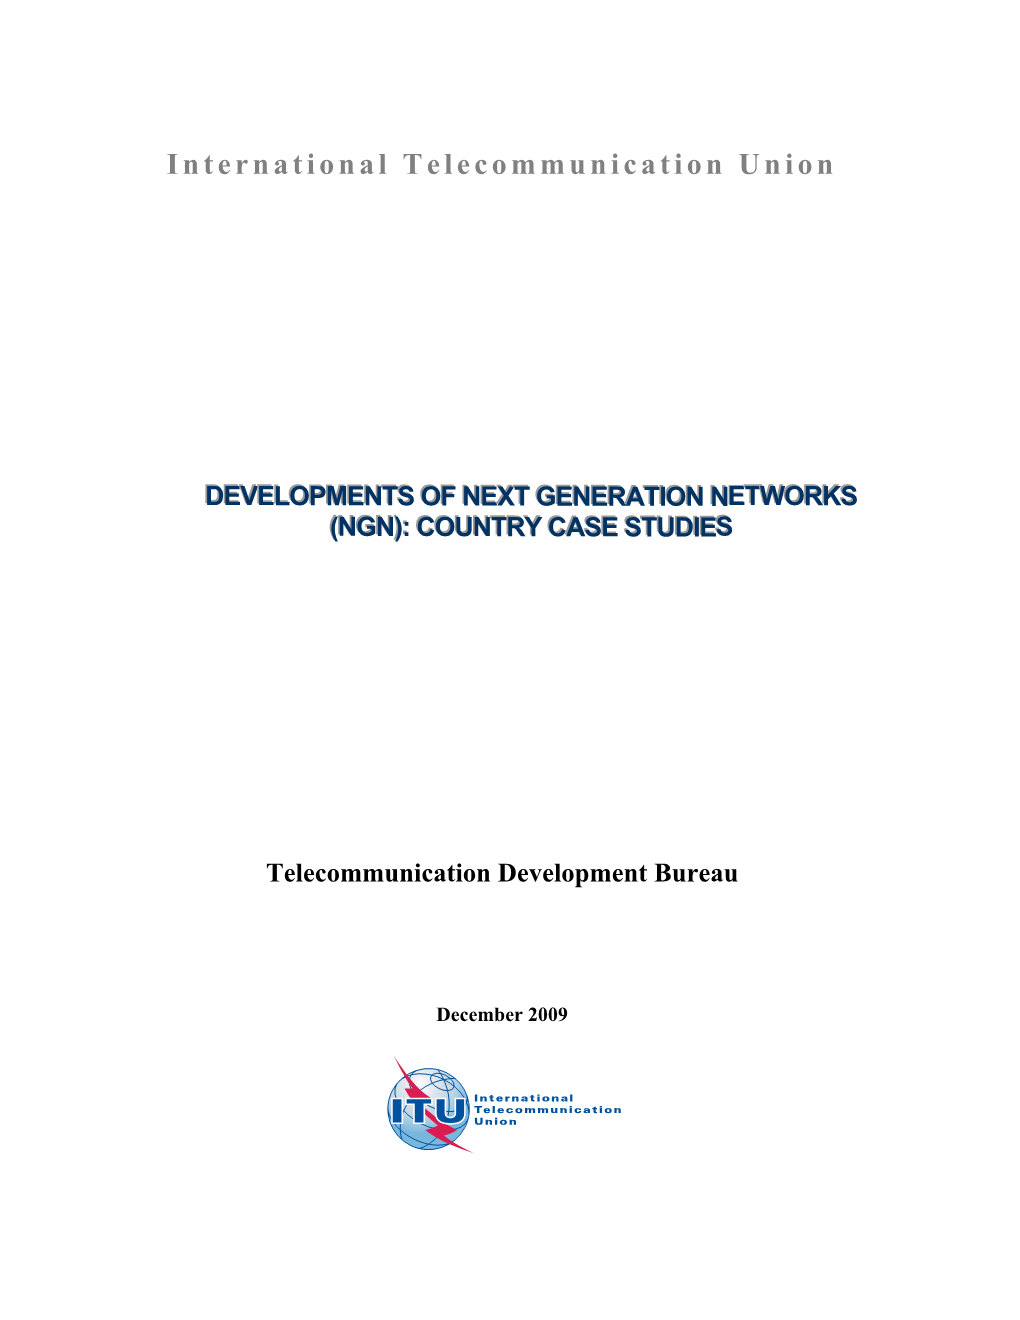 Developments of Next Generation Networks (NGN): Country Case Studies Was Written by Dr